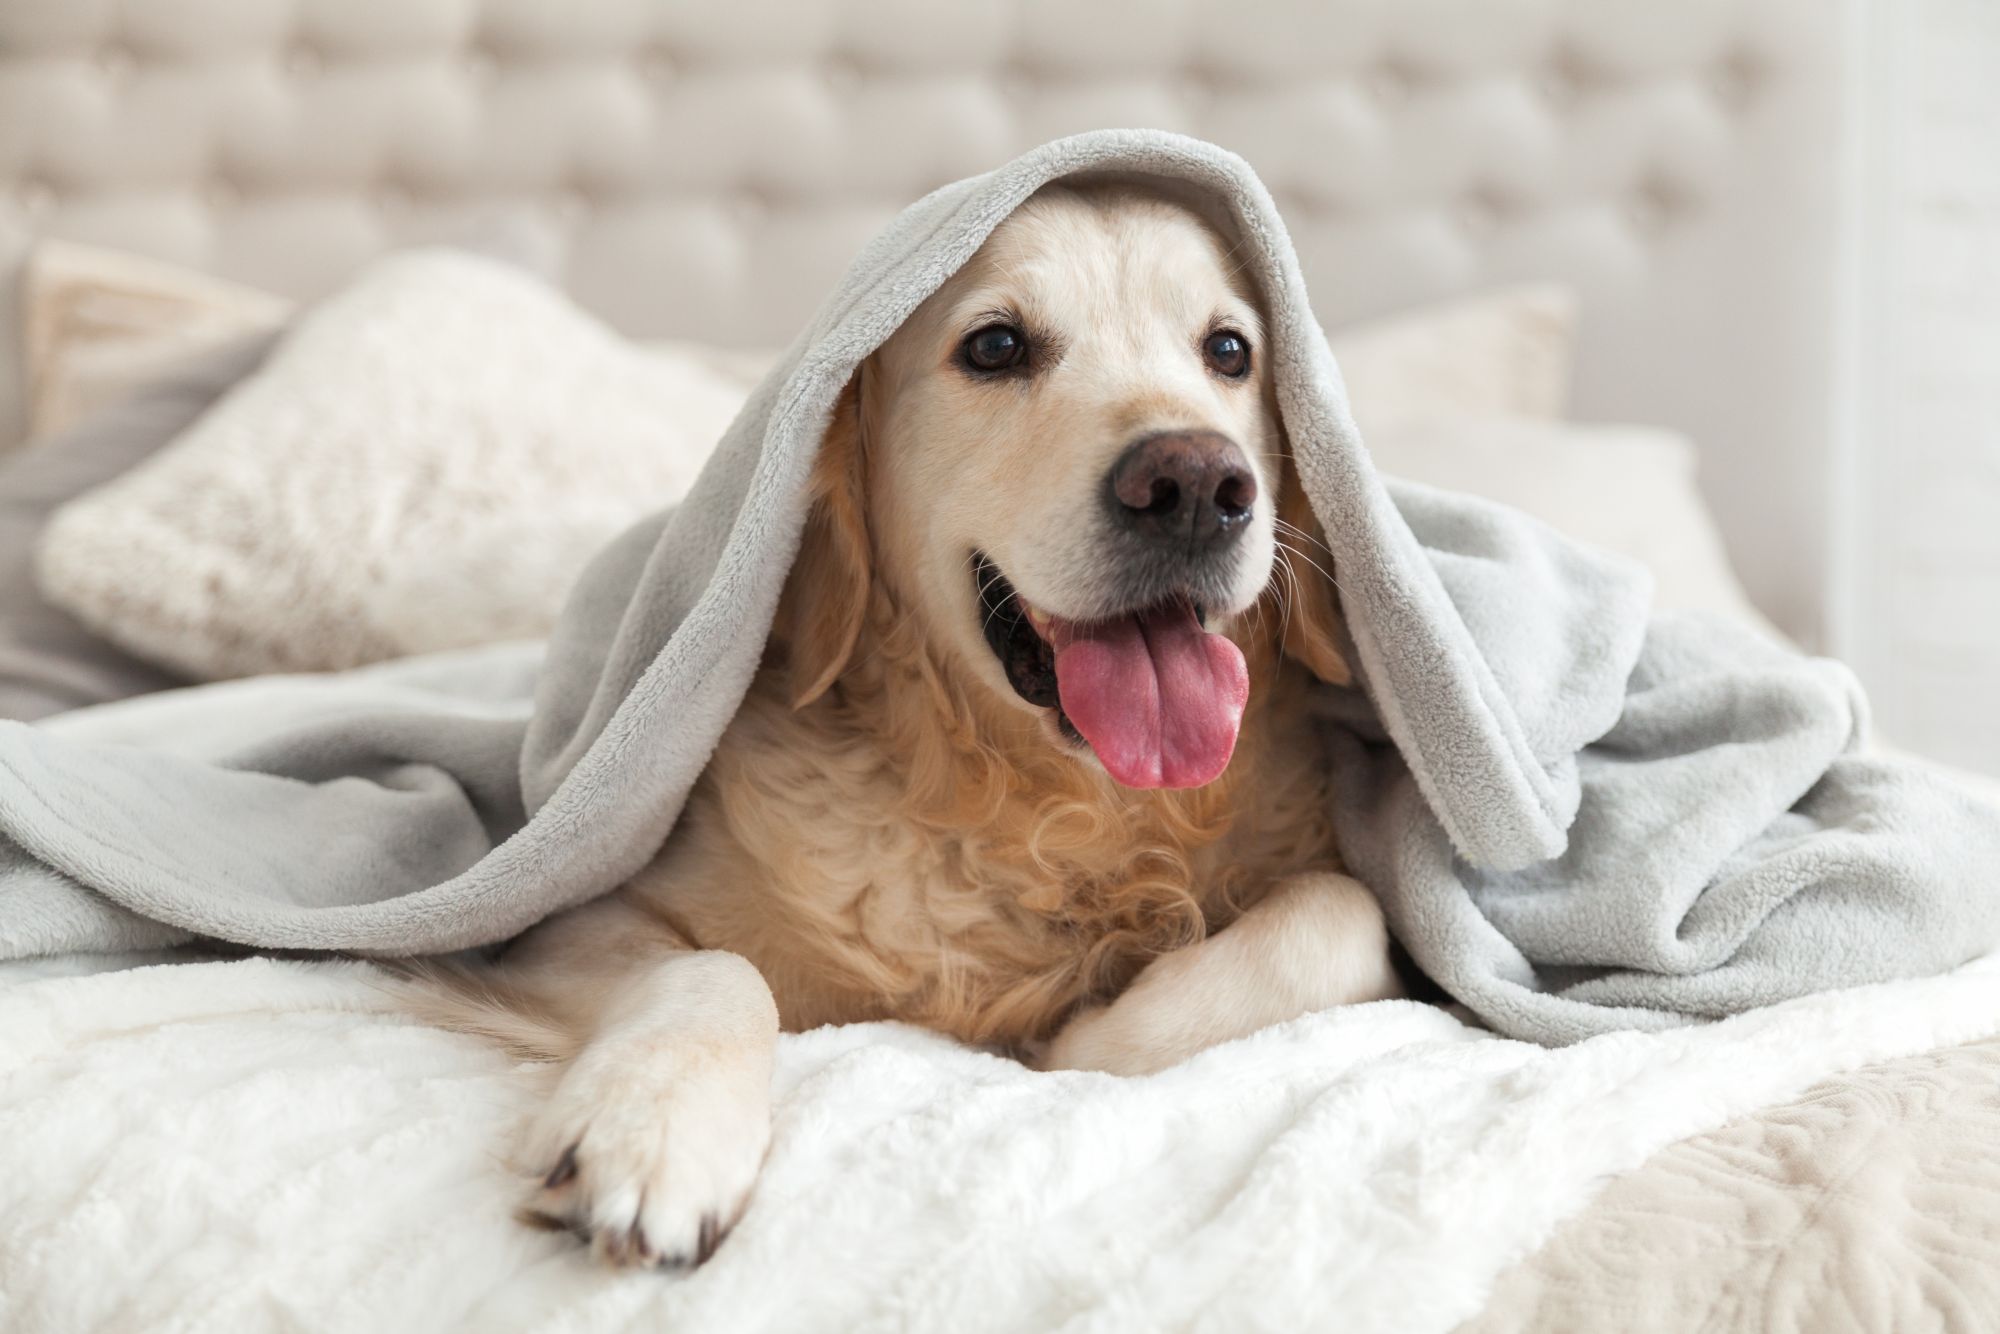 A dog on a bed underneath a blanket